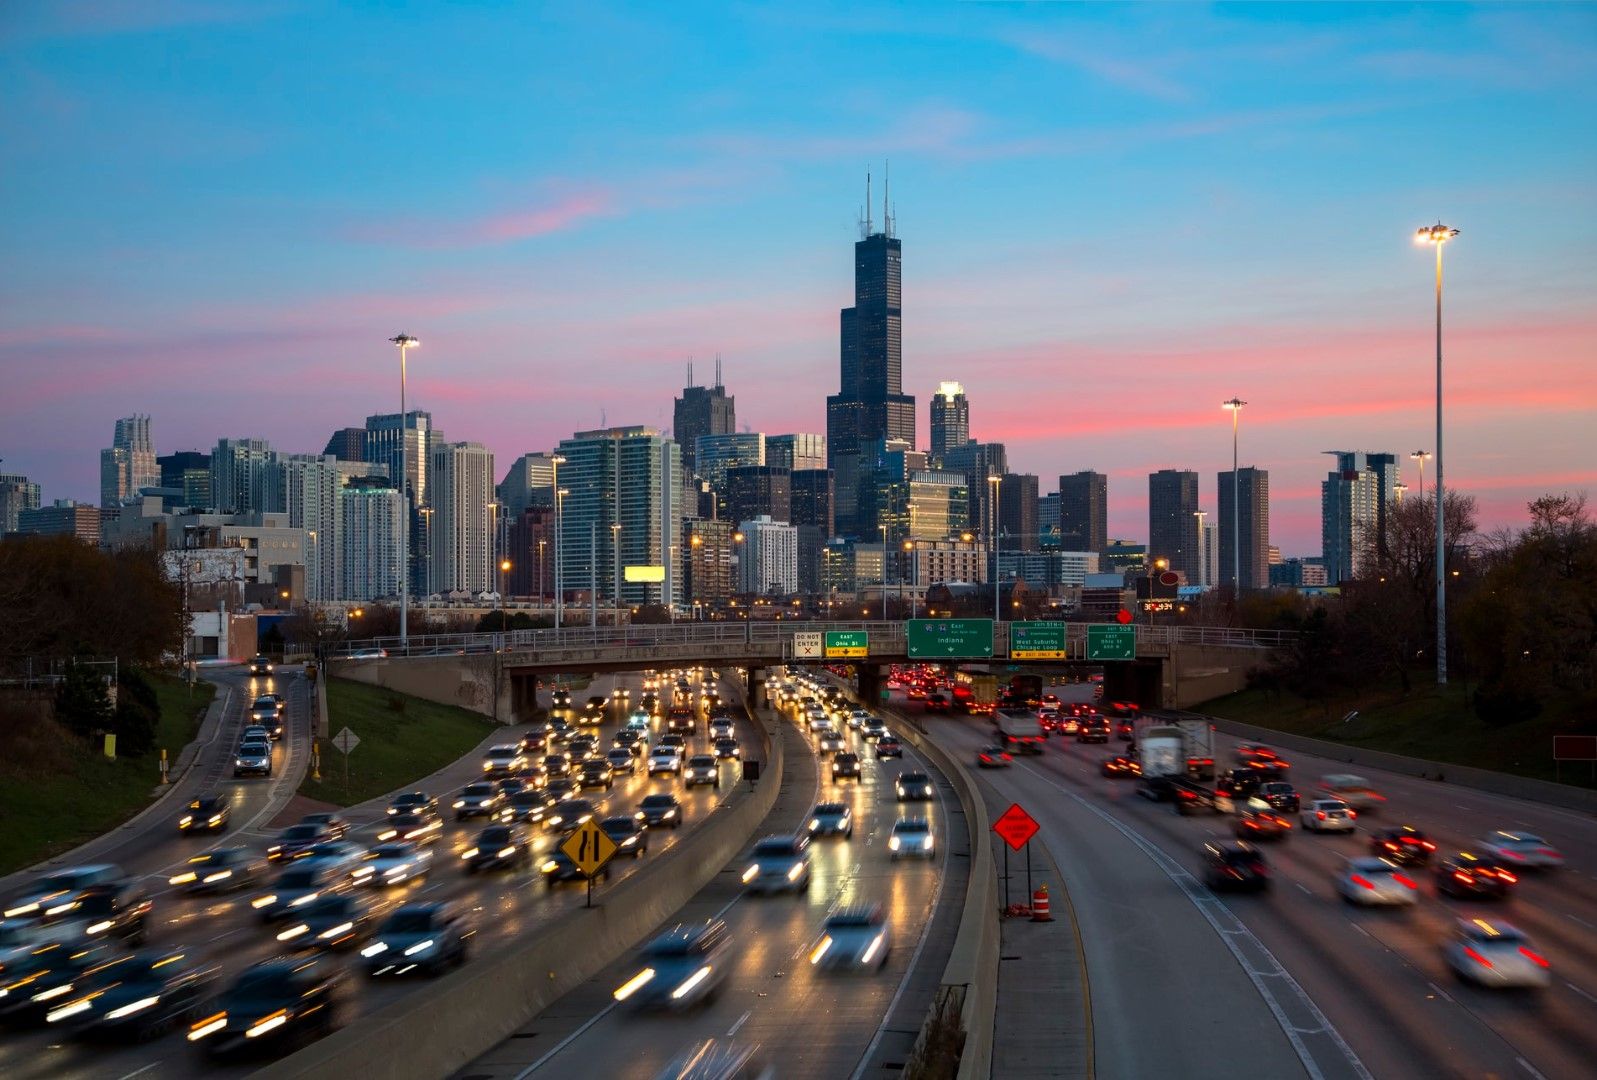 License Plate Cameras in Use on Chicago-area Highways